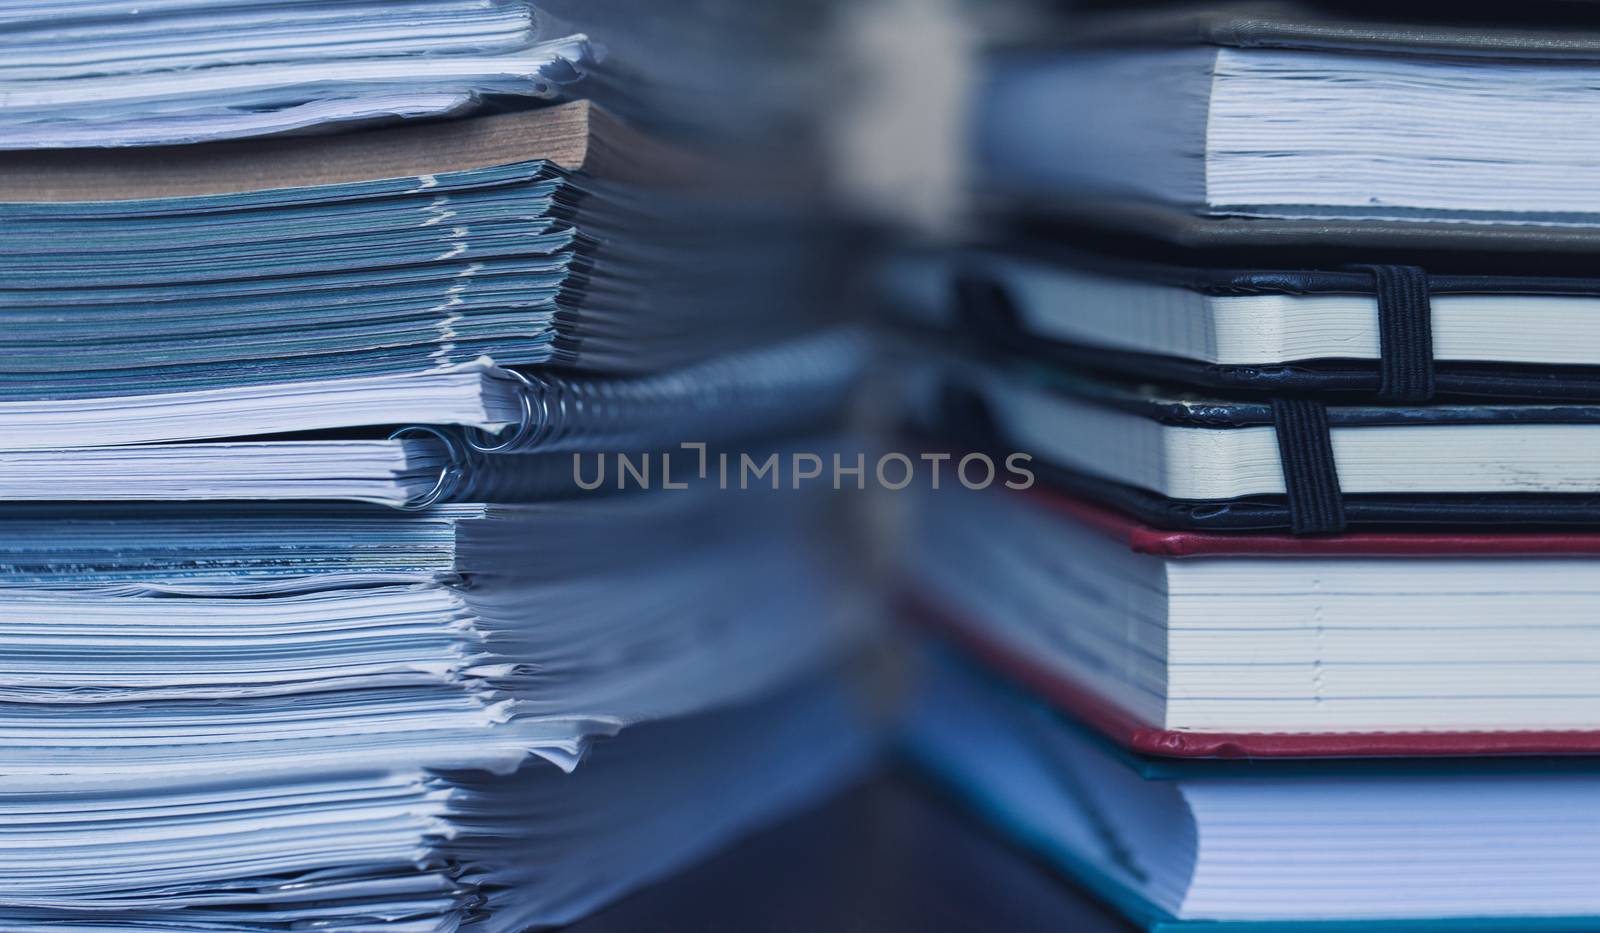 Accounting and taxes. Large pile of magazine and books by vlad_star